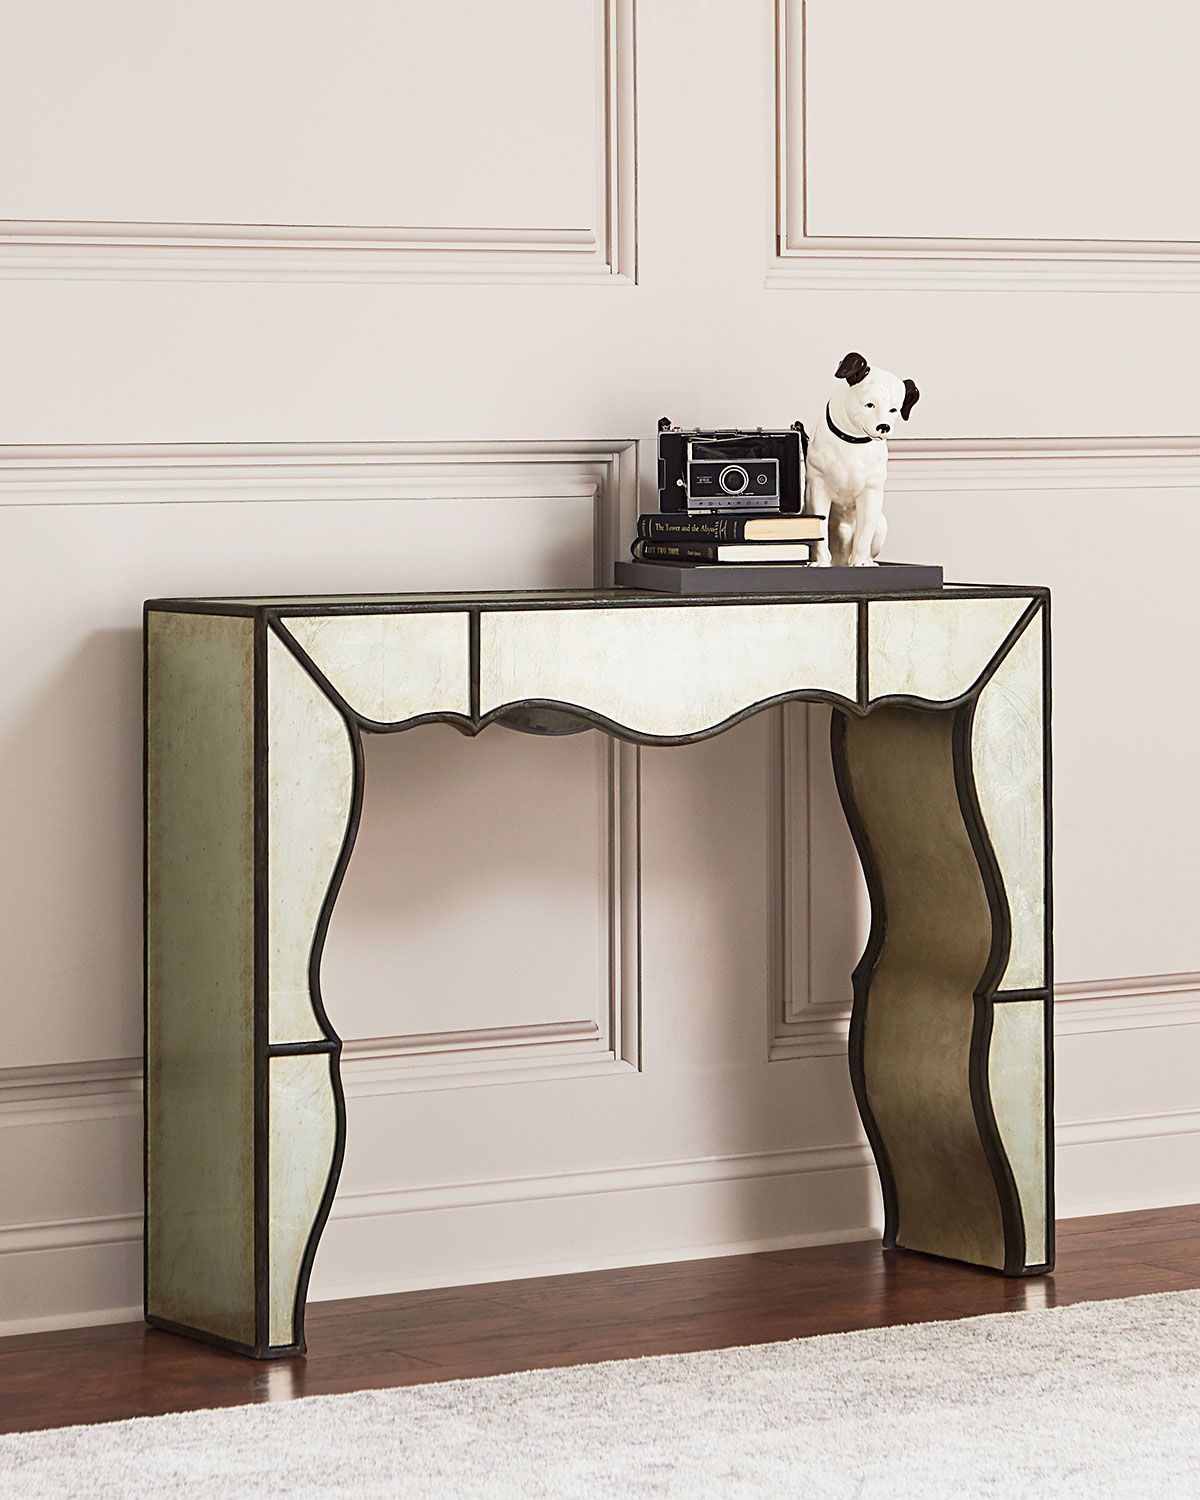 Hooker Furniture Garth Eglomise Mirrored Console Table | Neiman Marcus Inside Mirrored Modern Console Tables (View 2 of 20)